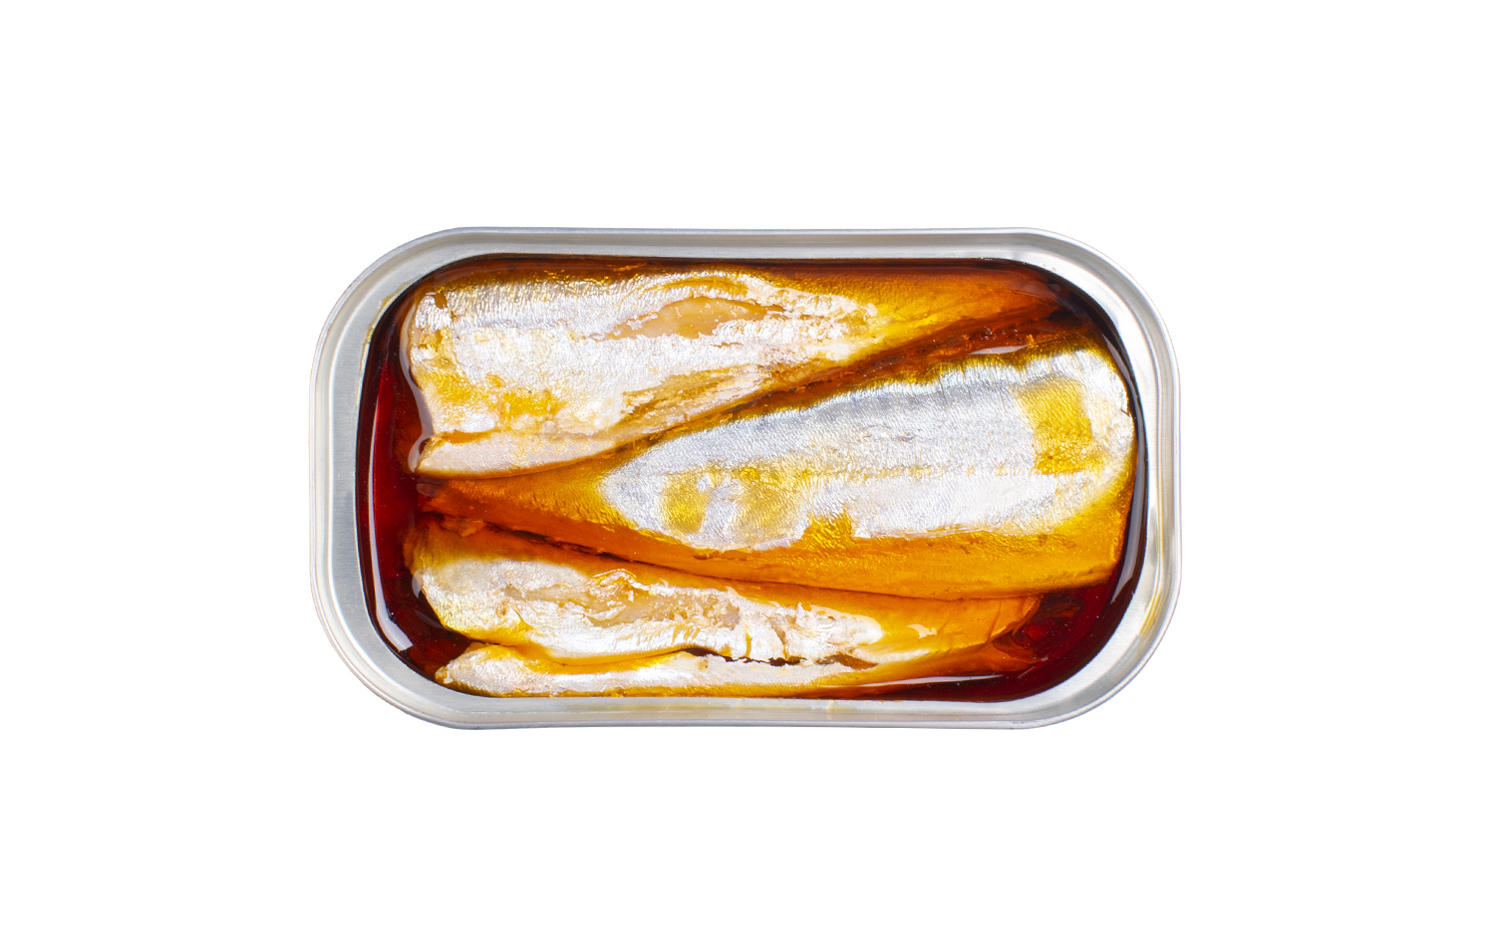 Spiced Small Mackerel in Olive Oil